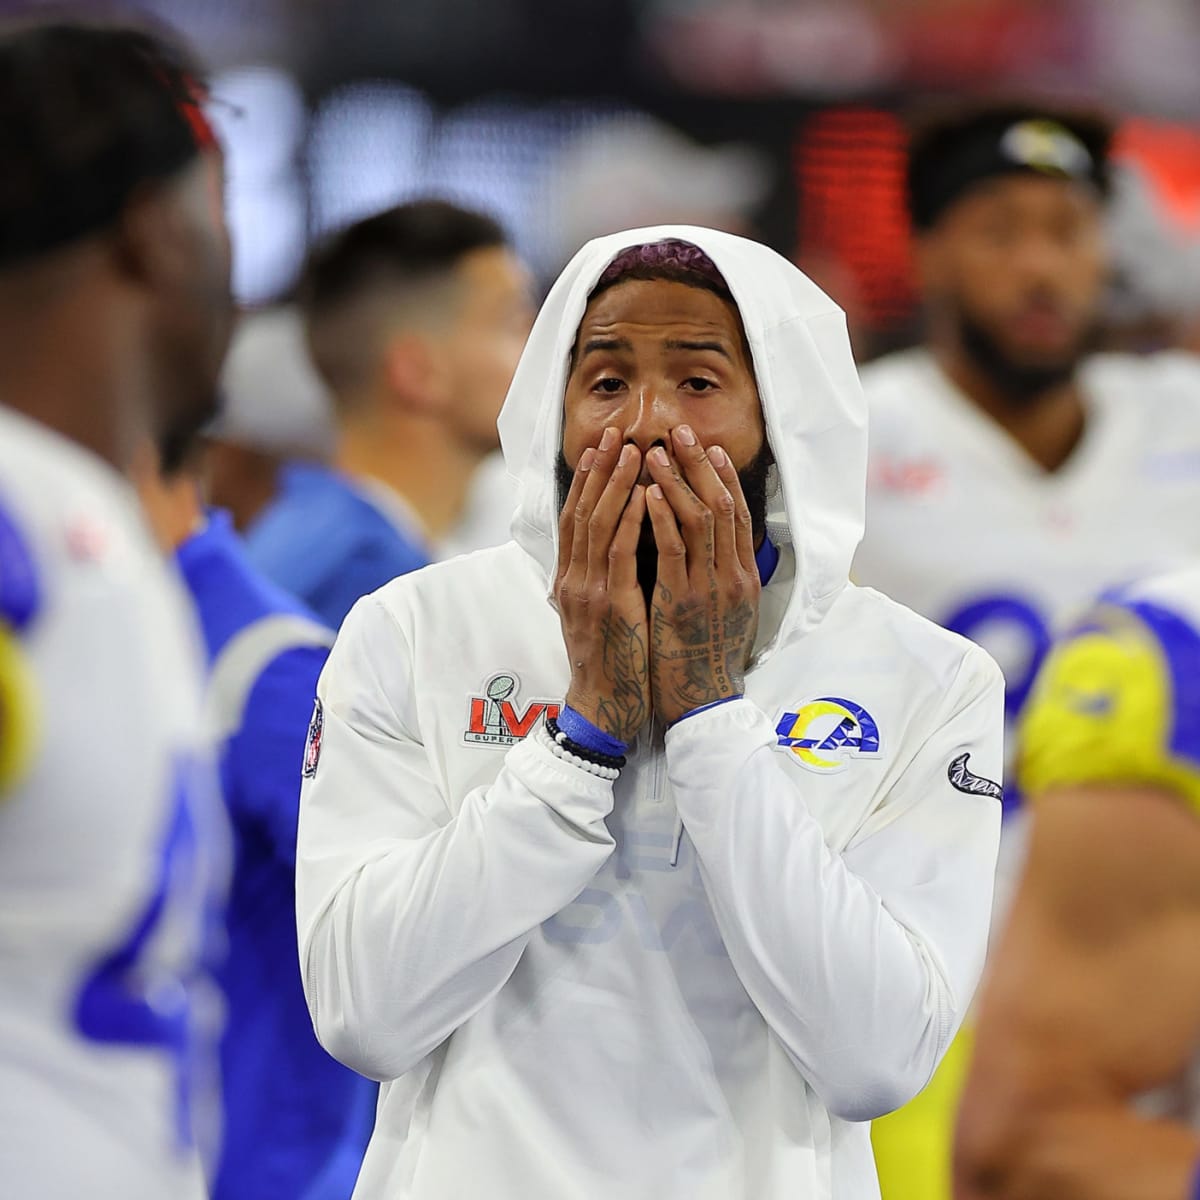 Why no one should panic about Odell Beckham Jr.'s slow start with Rams